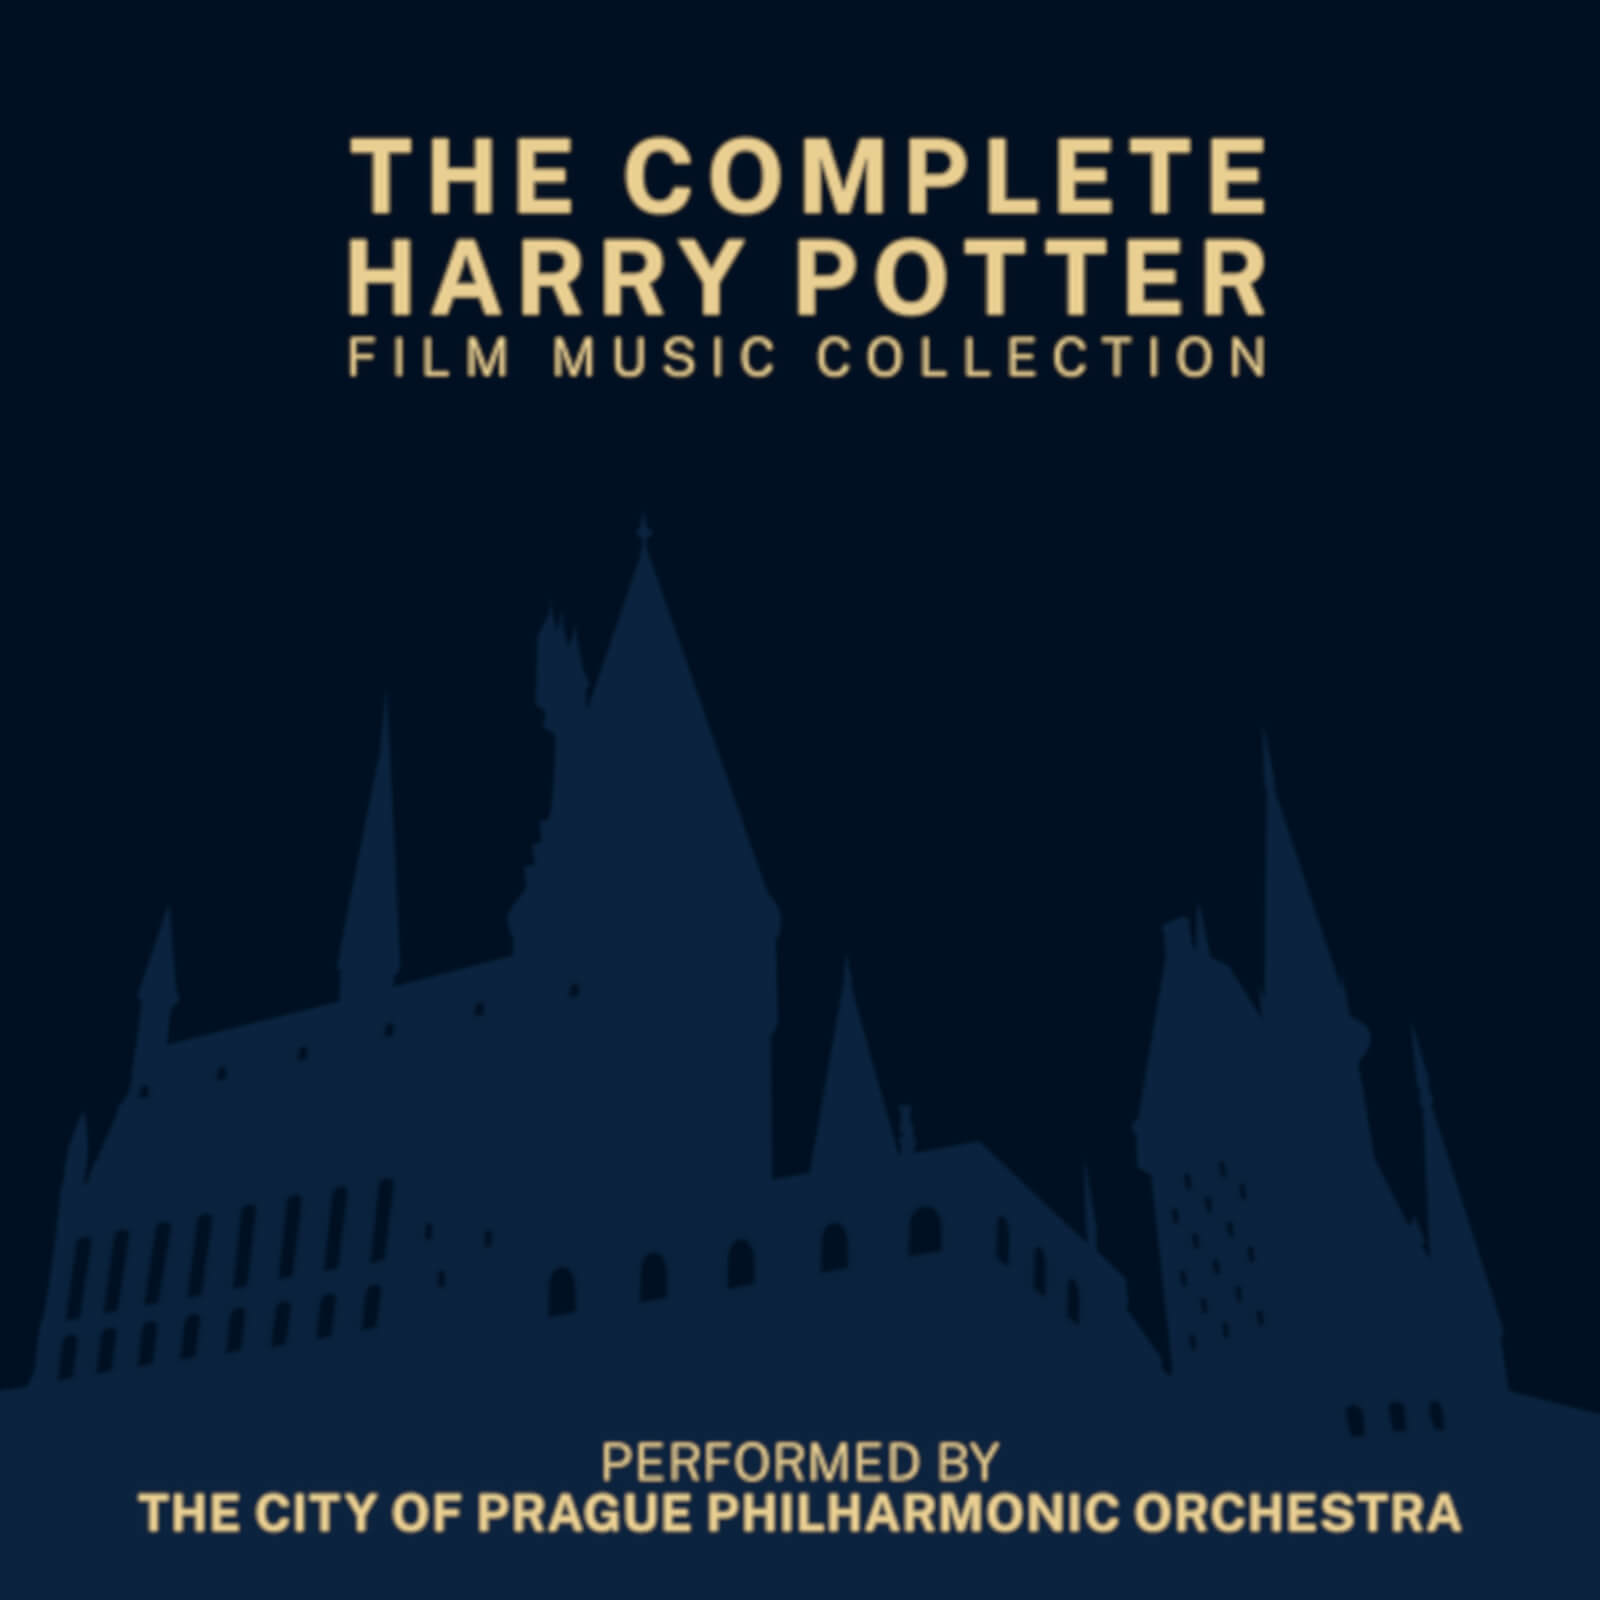 The Complete Harry Potter Film Music Collection LP Set